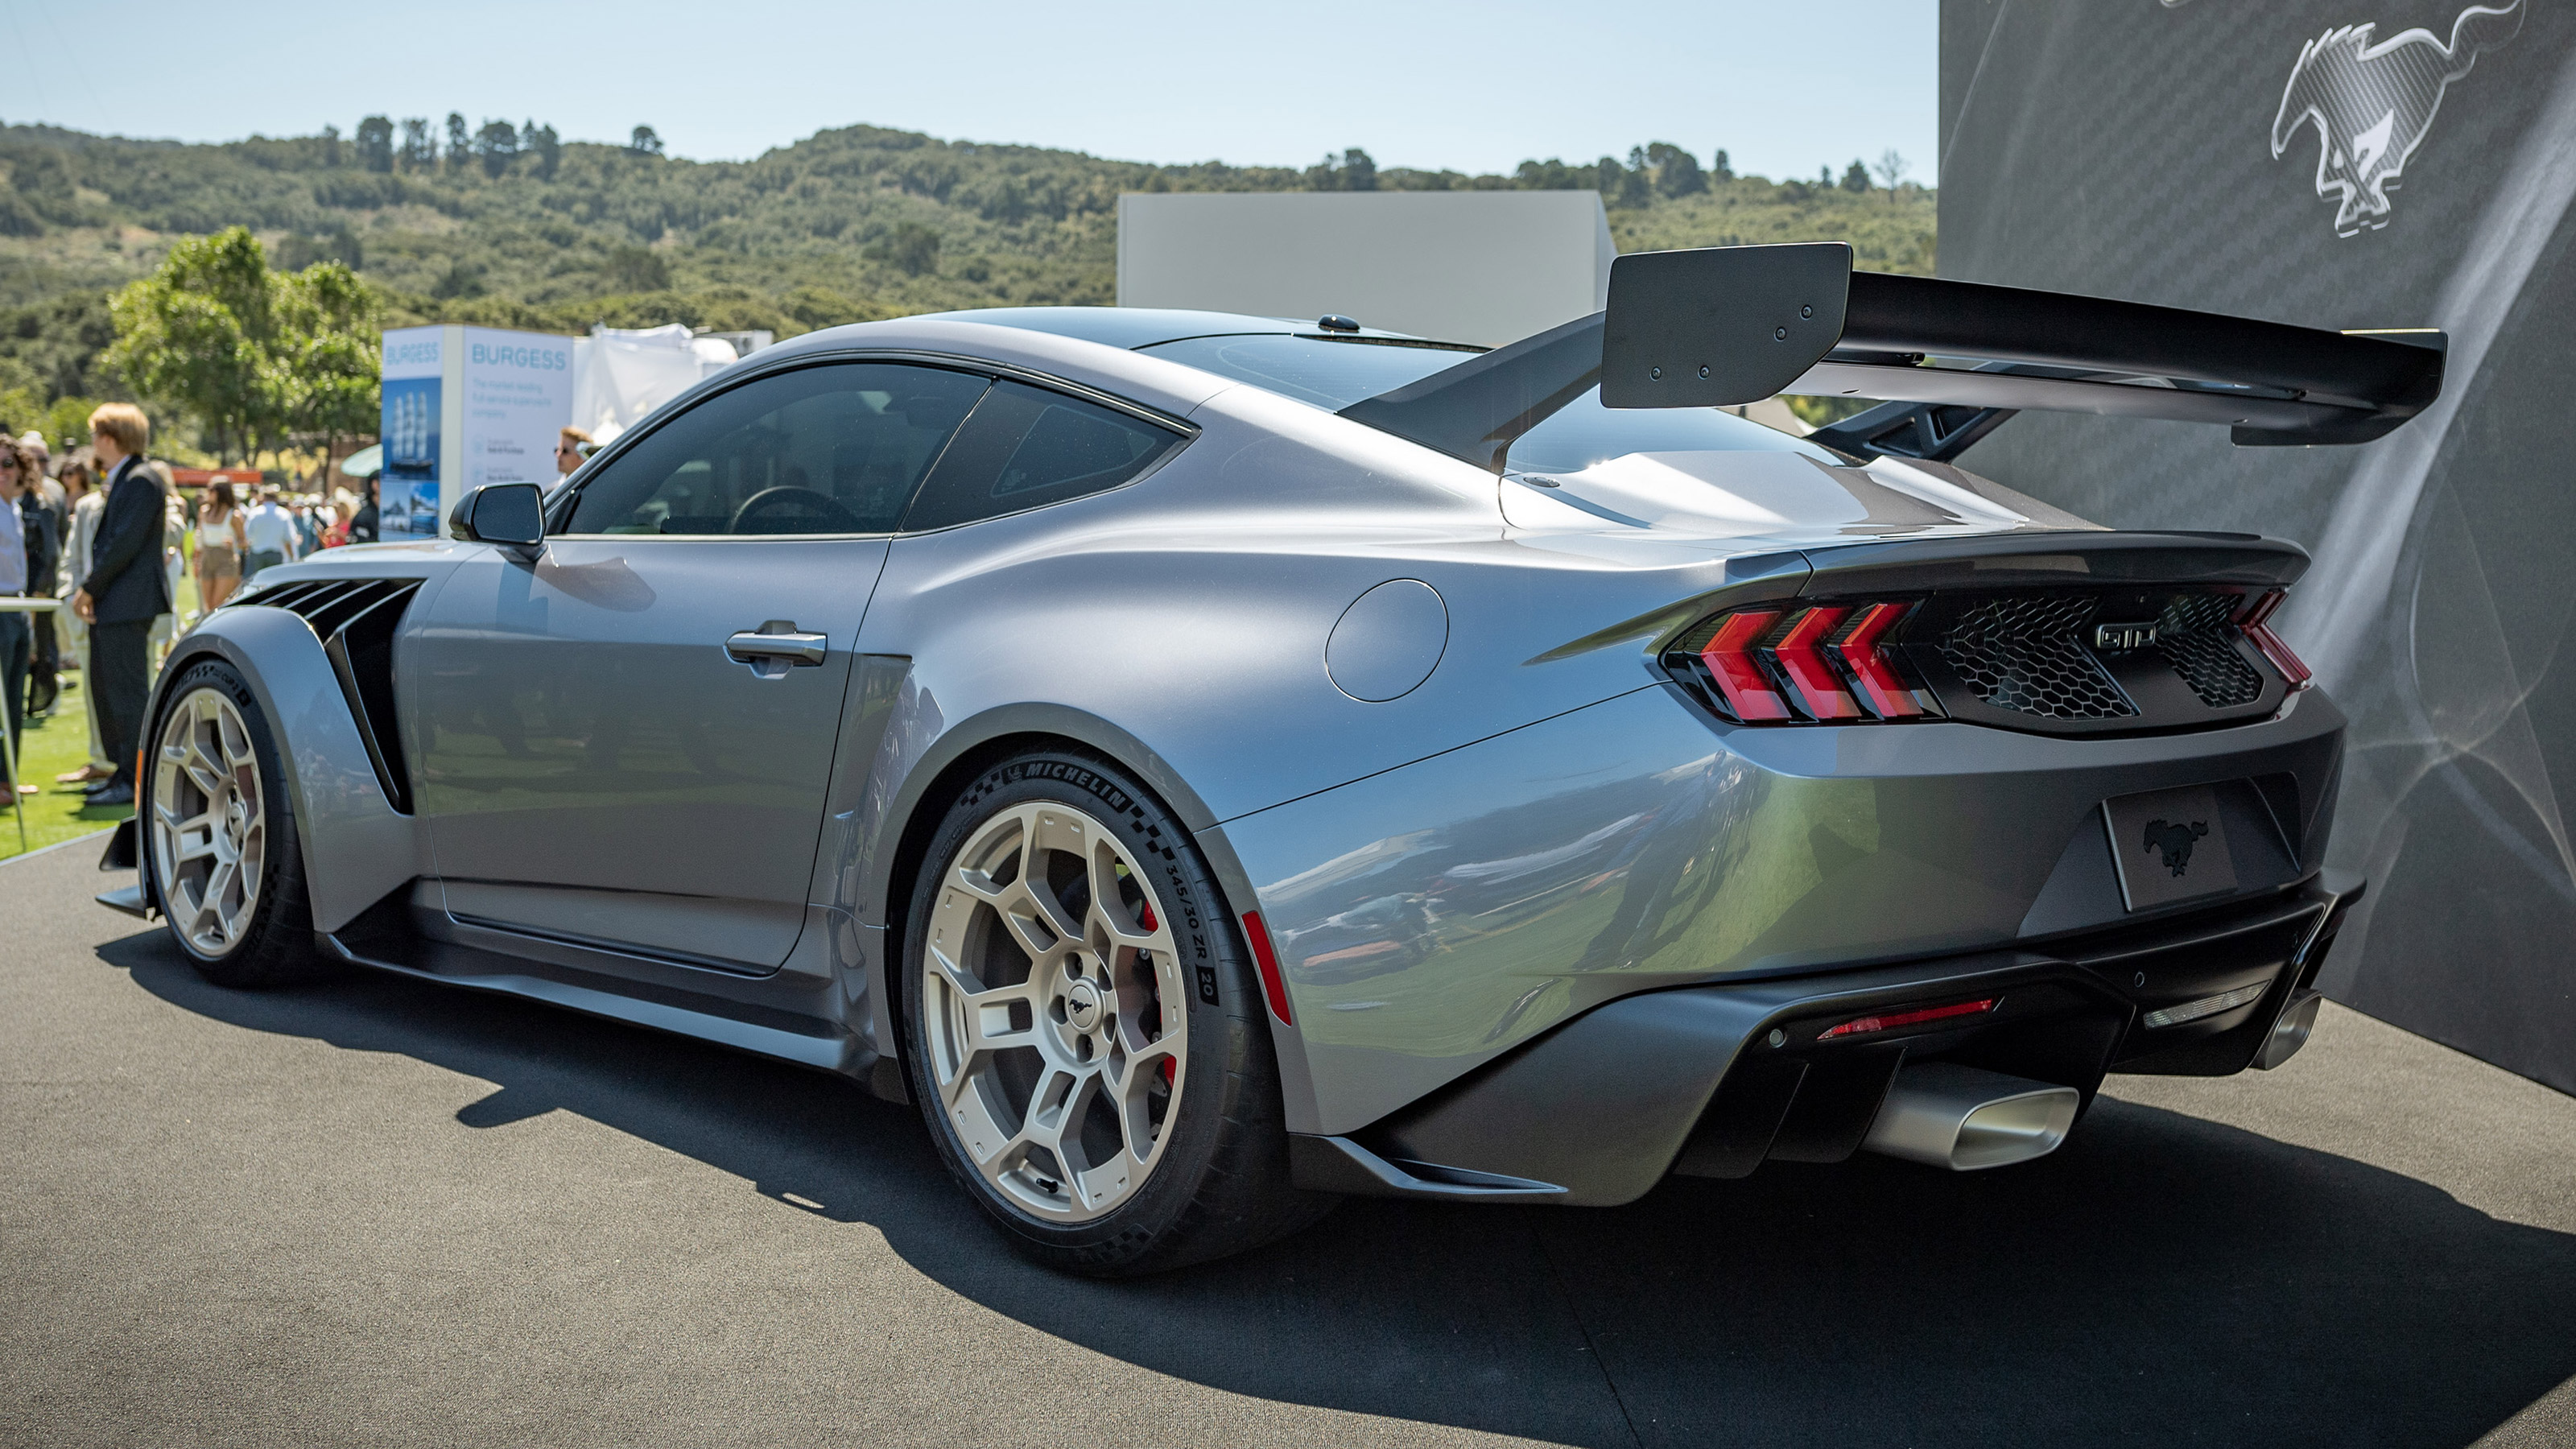 Limited-run Ford Mustang GTD revealed as GT3-inspired road car